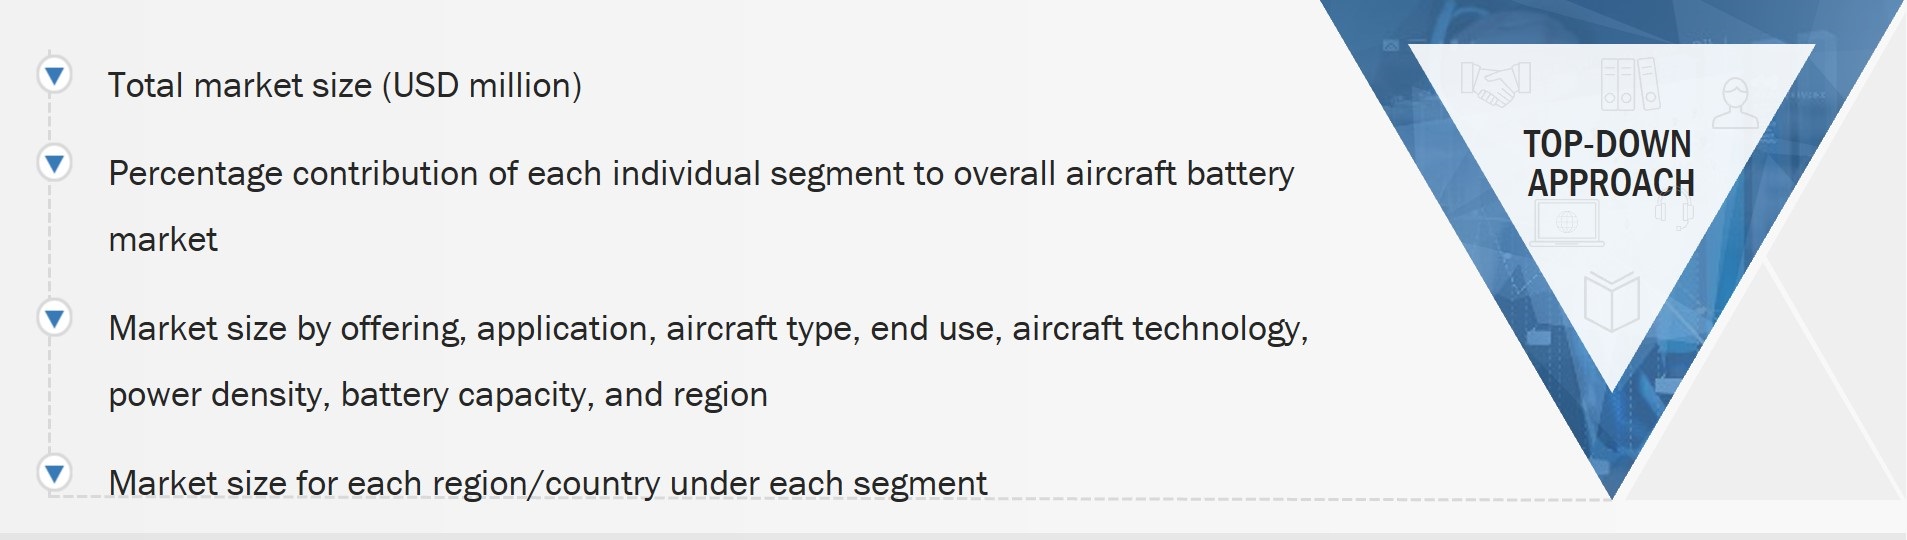 Aircraft Battery Market Size, and Top-Down approach 